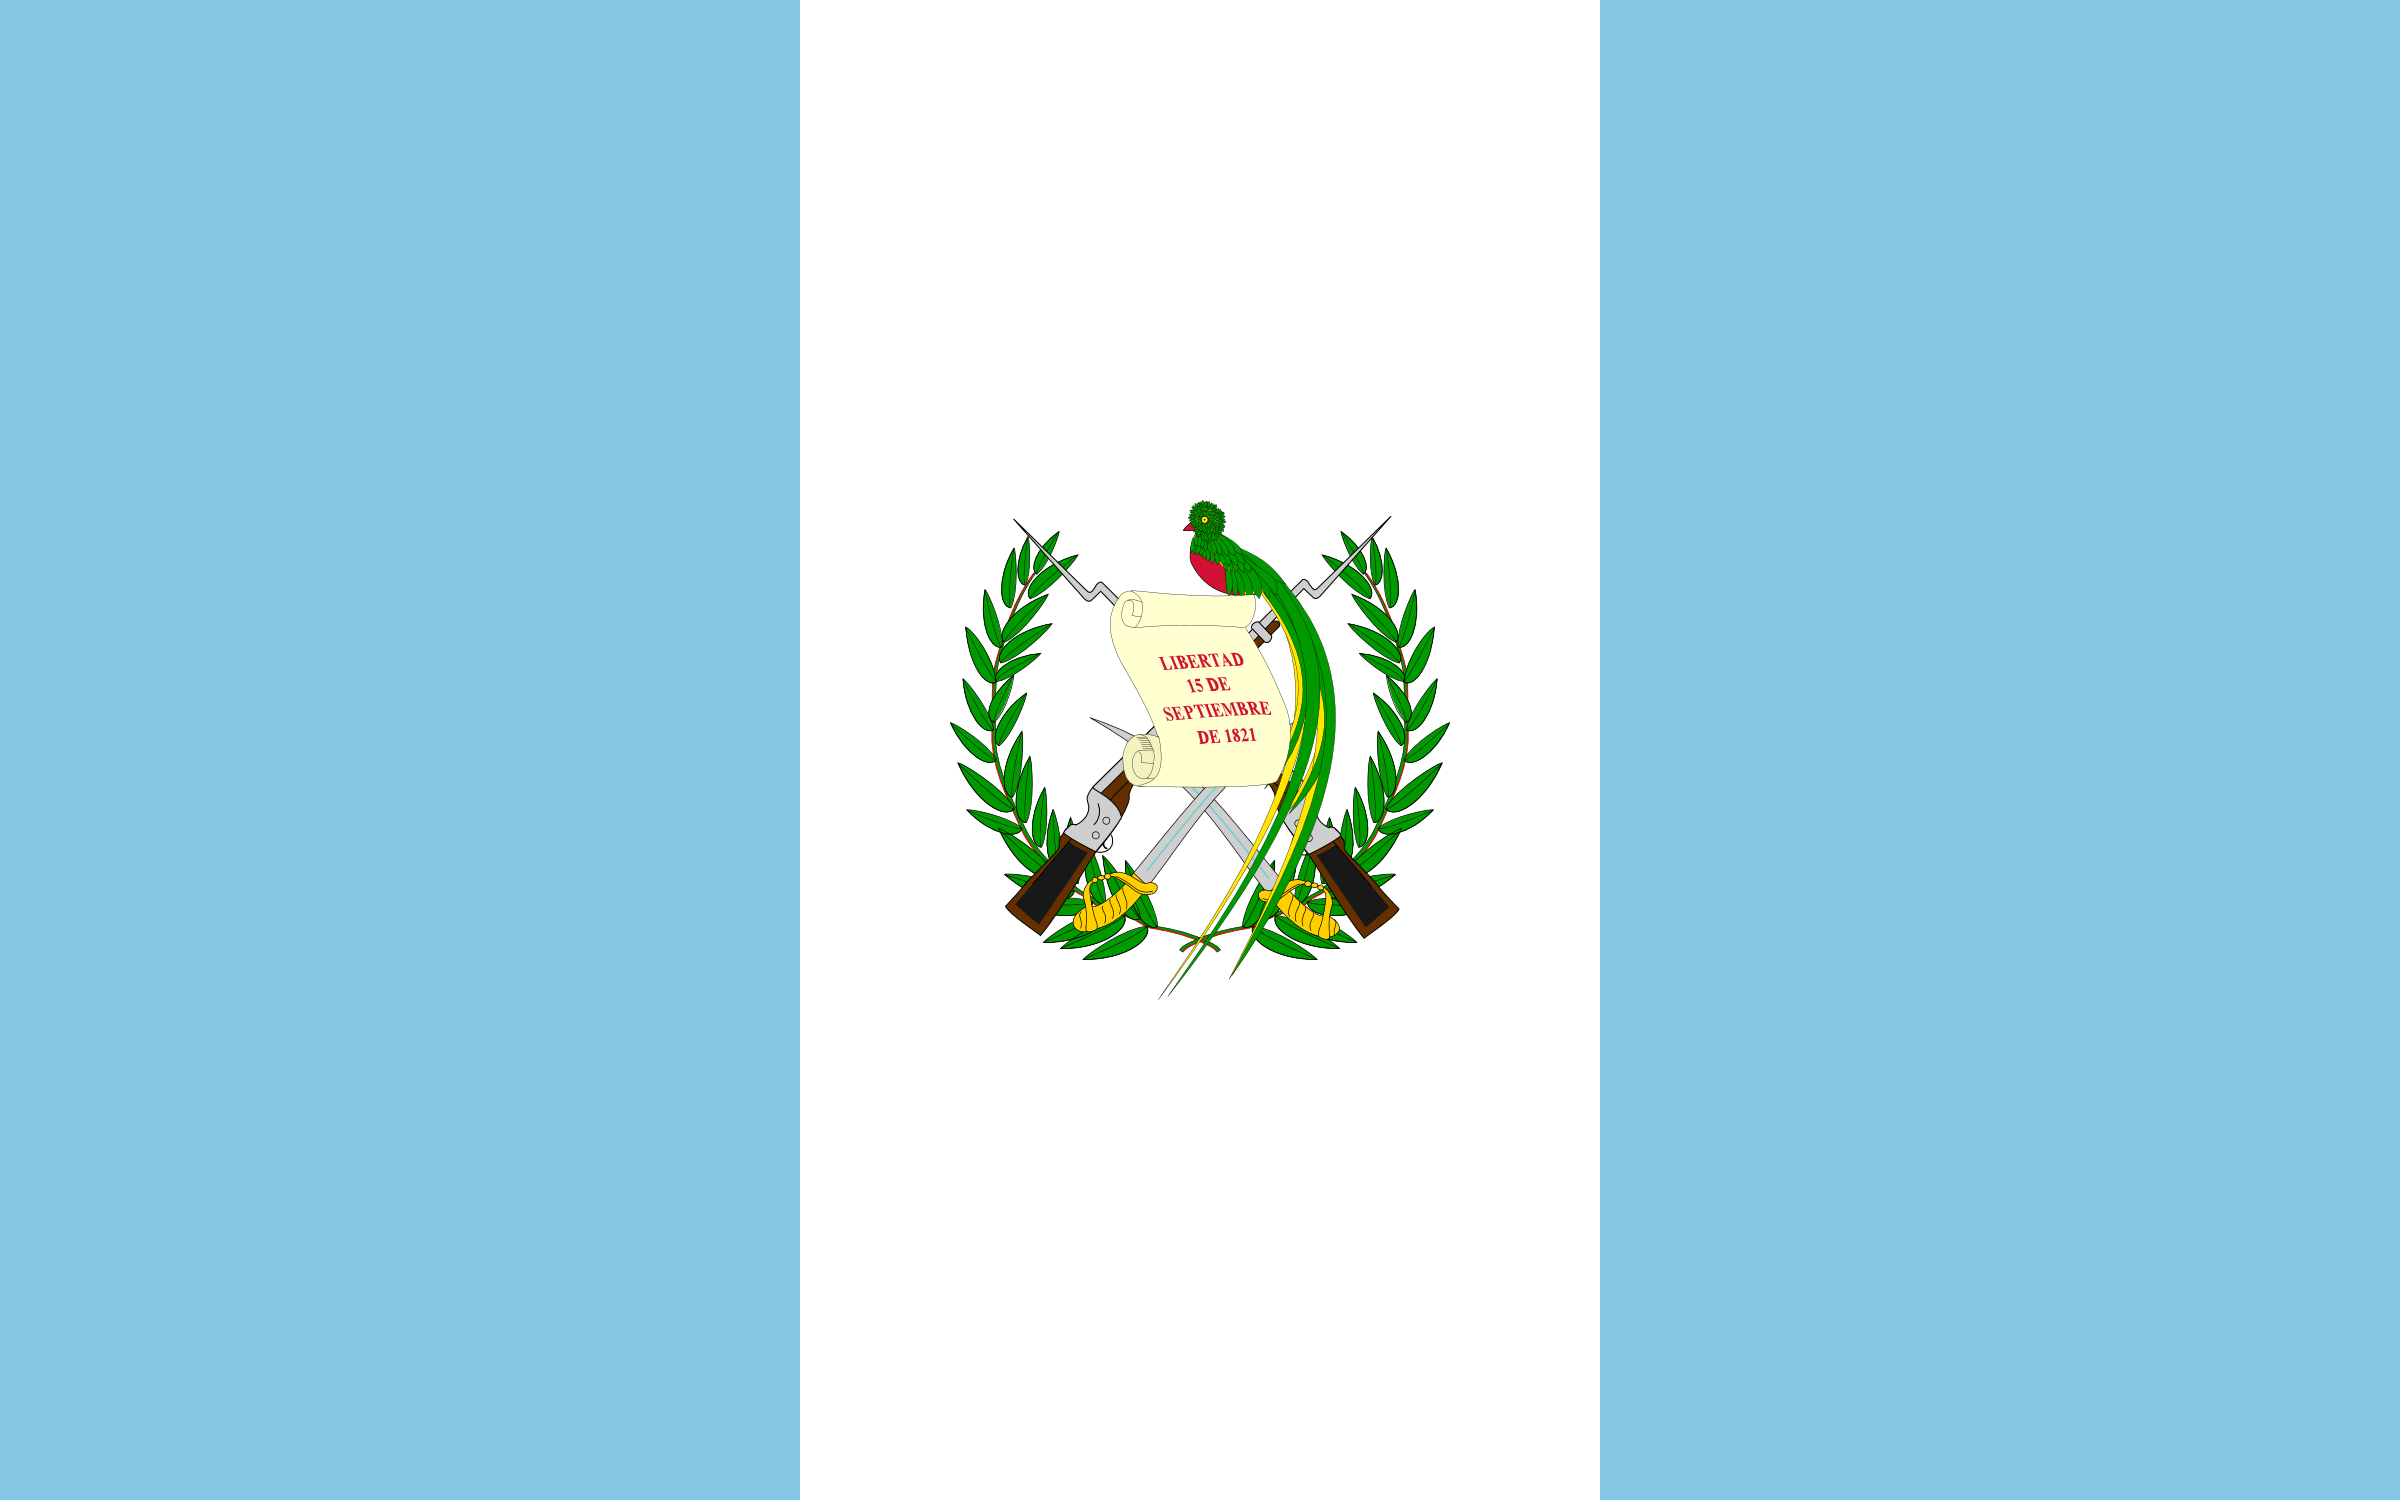 the image shows the guatemalan flag